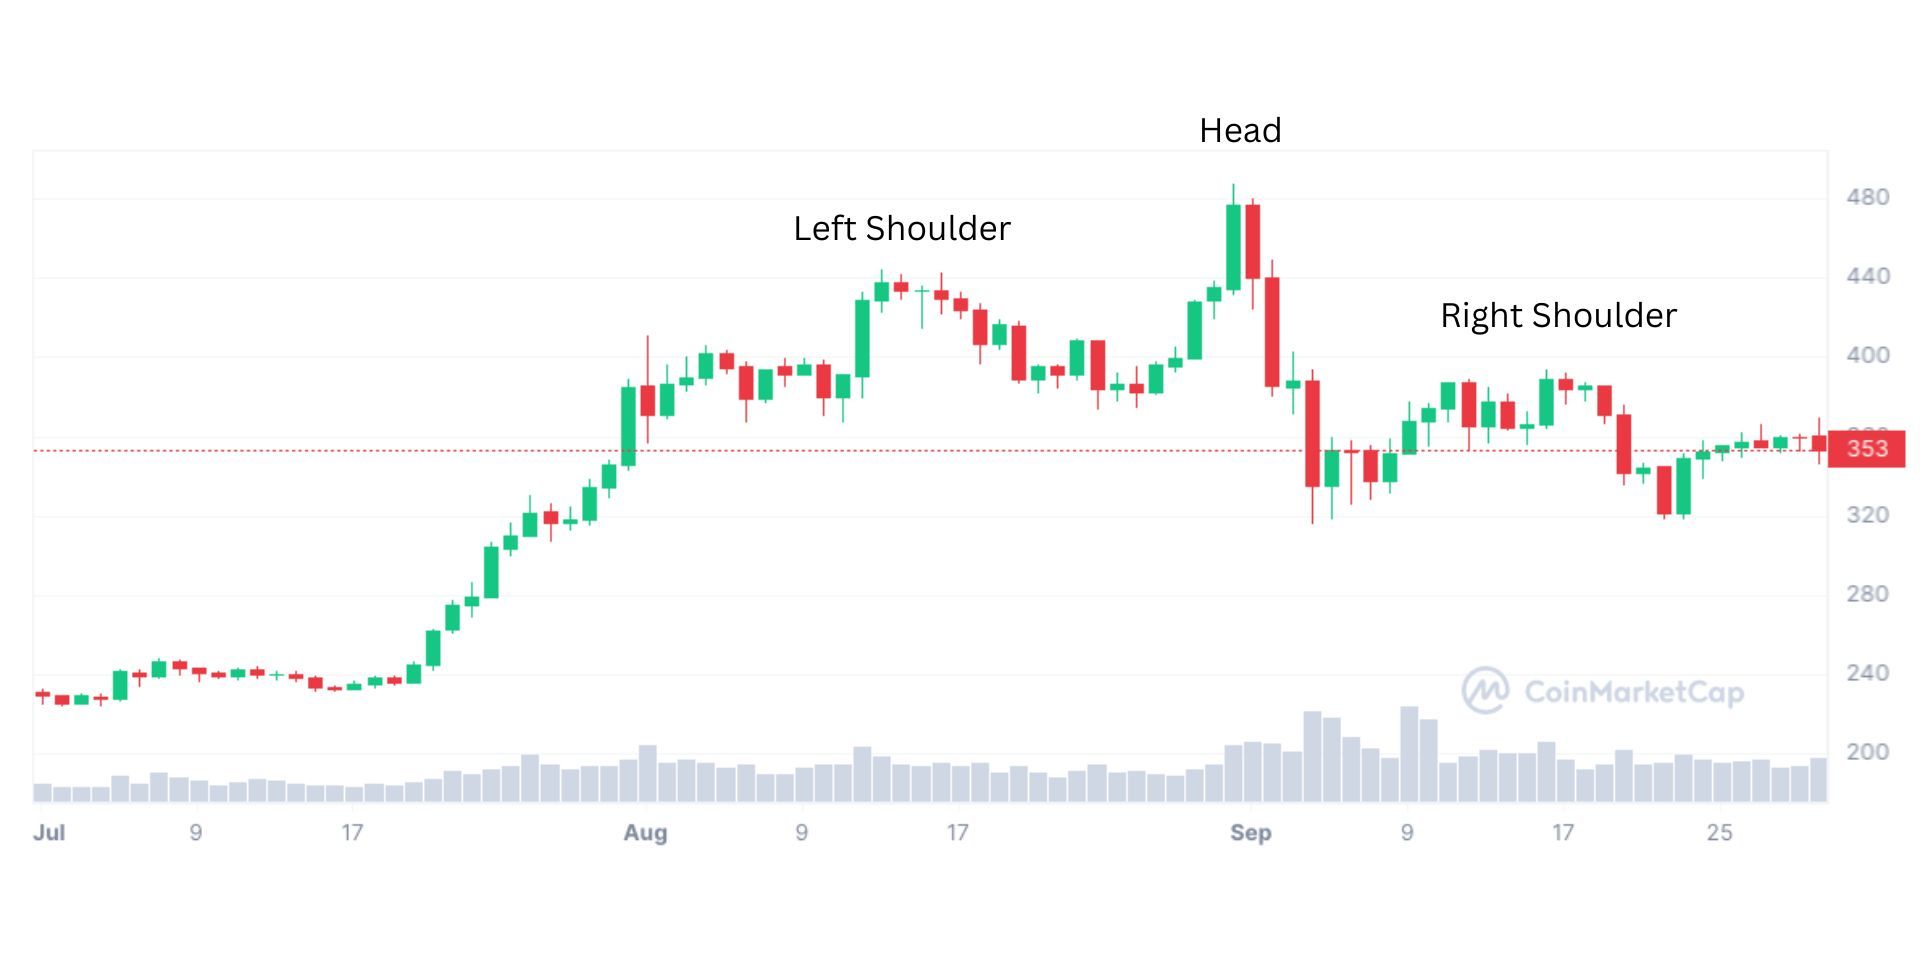 candlestick graph of ethereum prices with labels